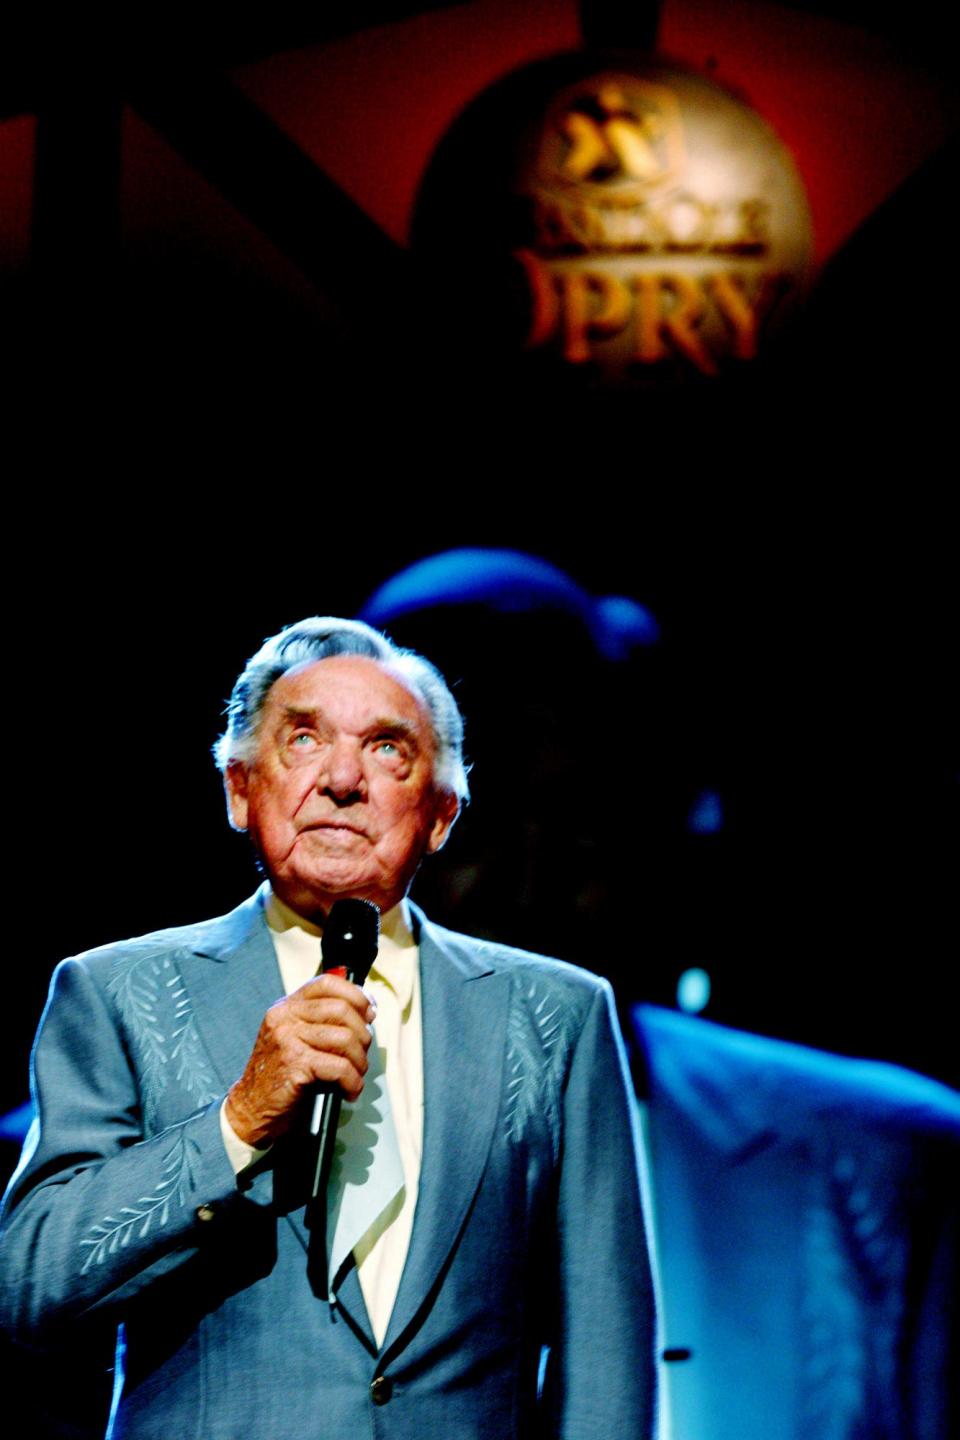 Ray Price performs for his fans at the Grand Ole Opry on July 14, 2006.